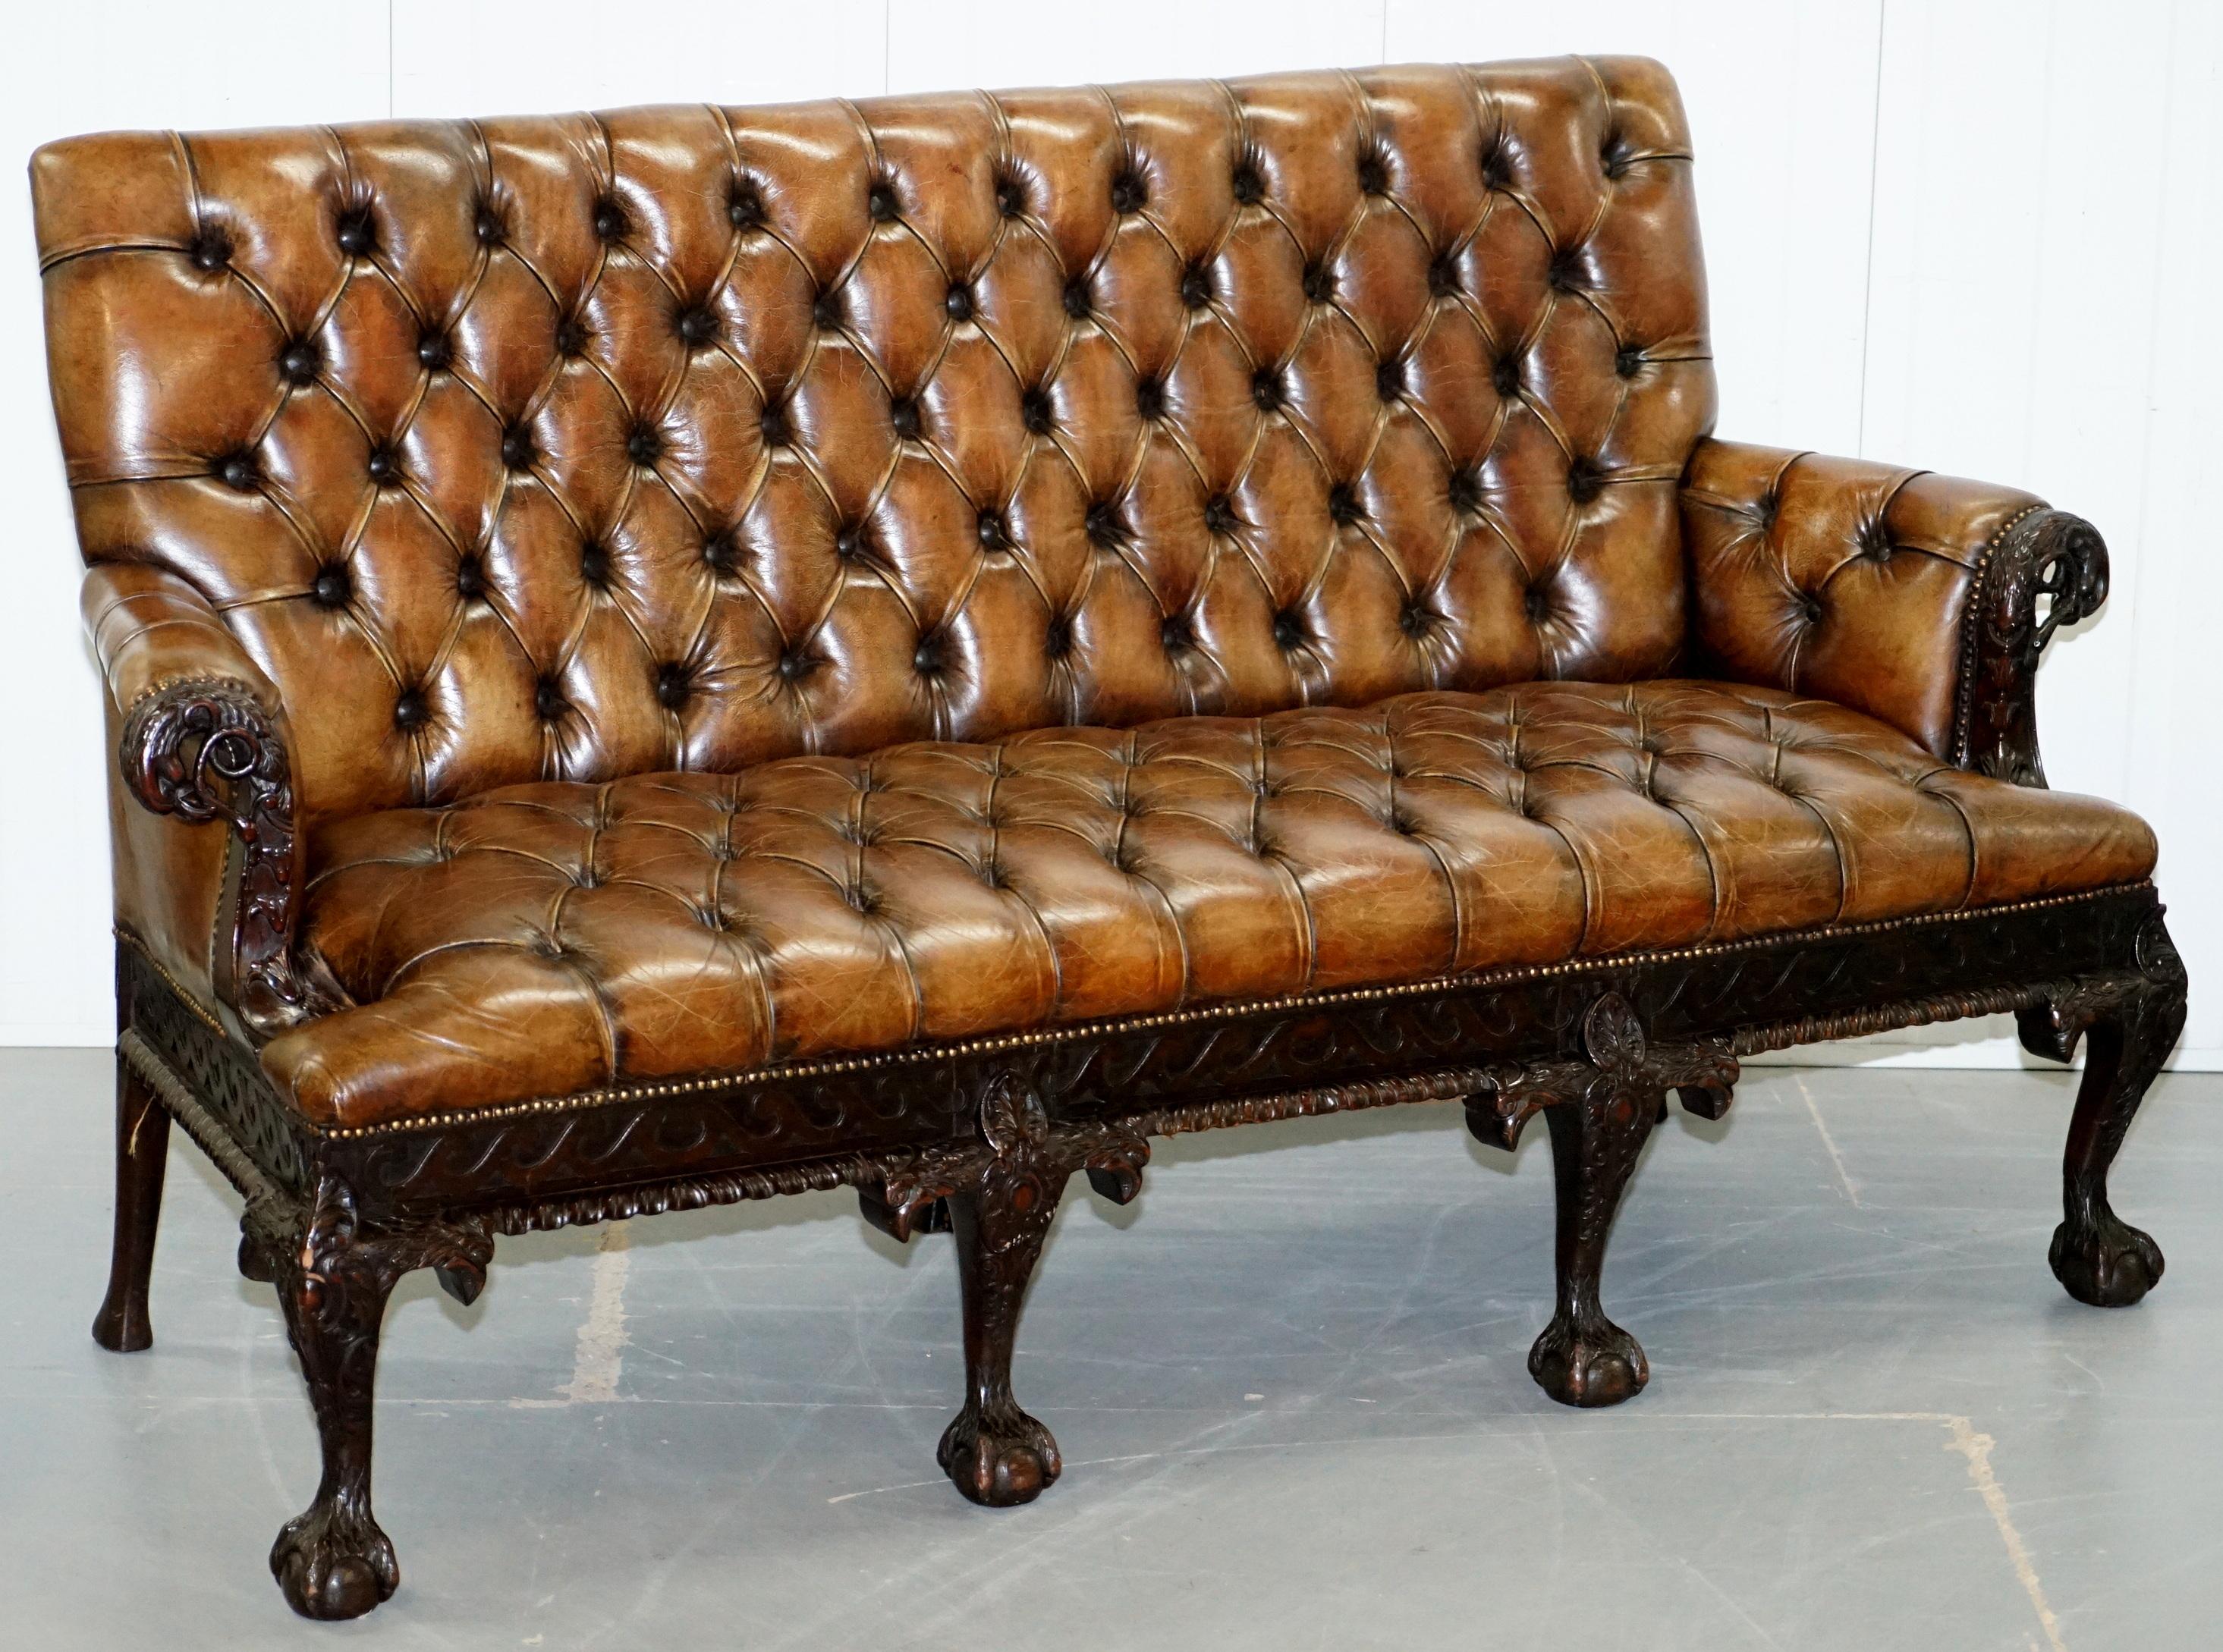 We are delighted to offer for sale this absolutely stunning Georgian Irish style Victorian Chesterfield brown leather sofa with hand carved Lion hairy paw feet and eagle detailing 

I’ve never seen another of this quality style and charm, it is